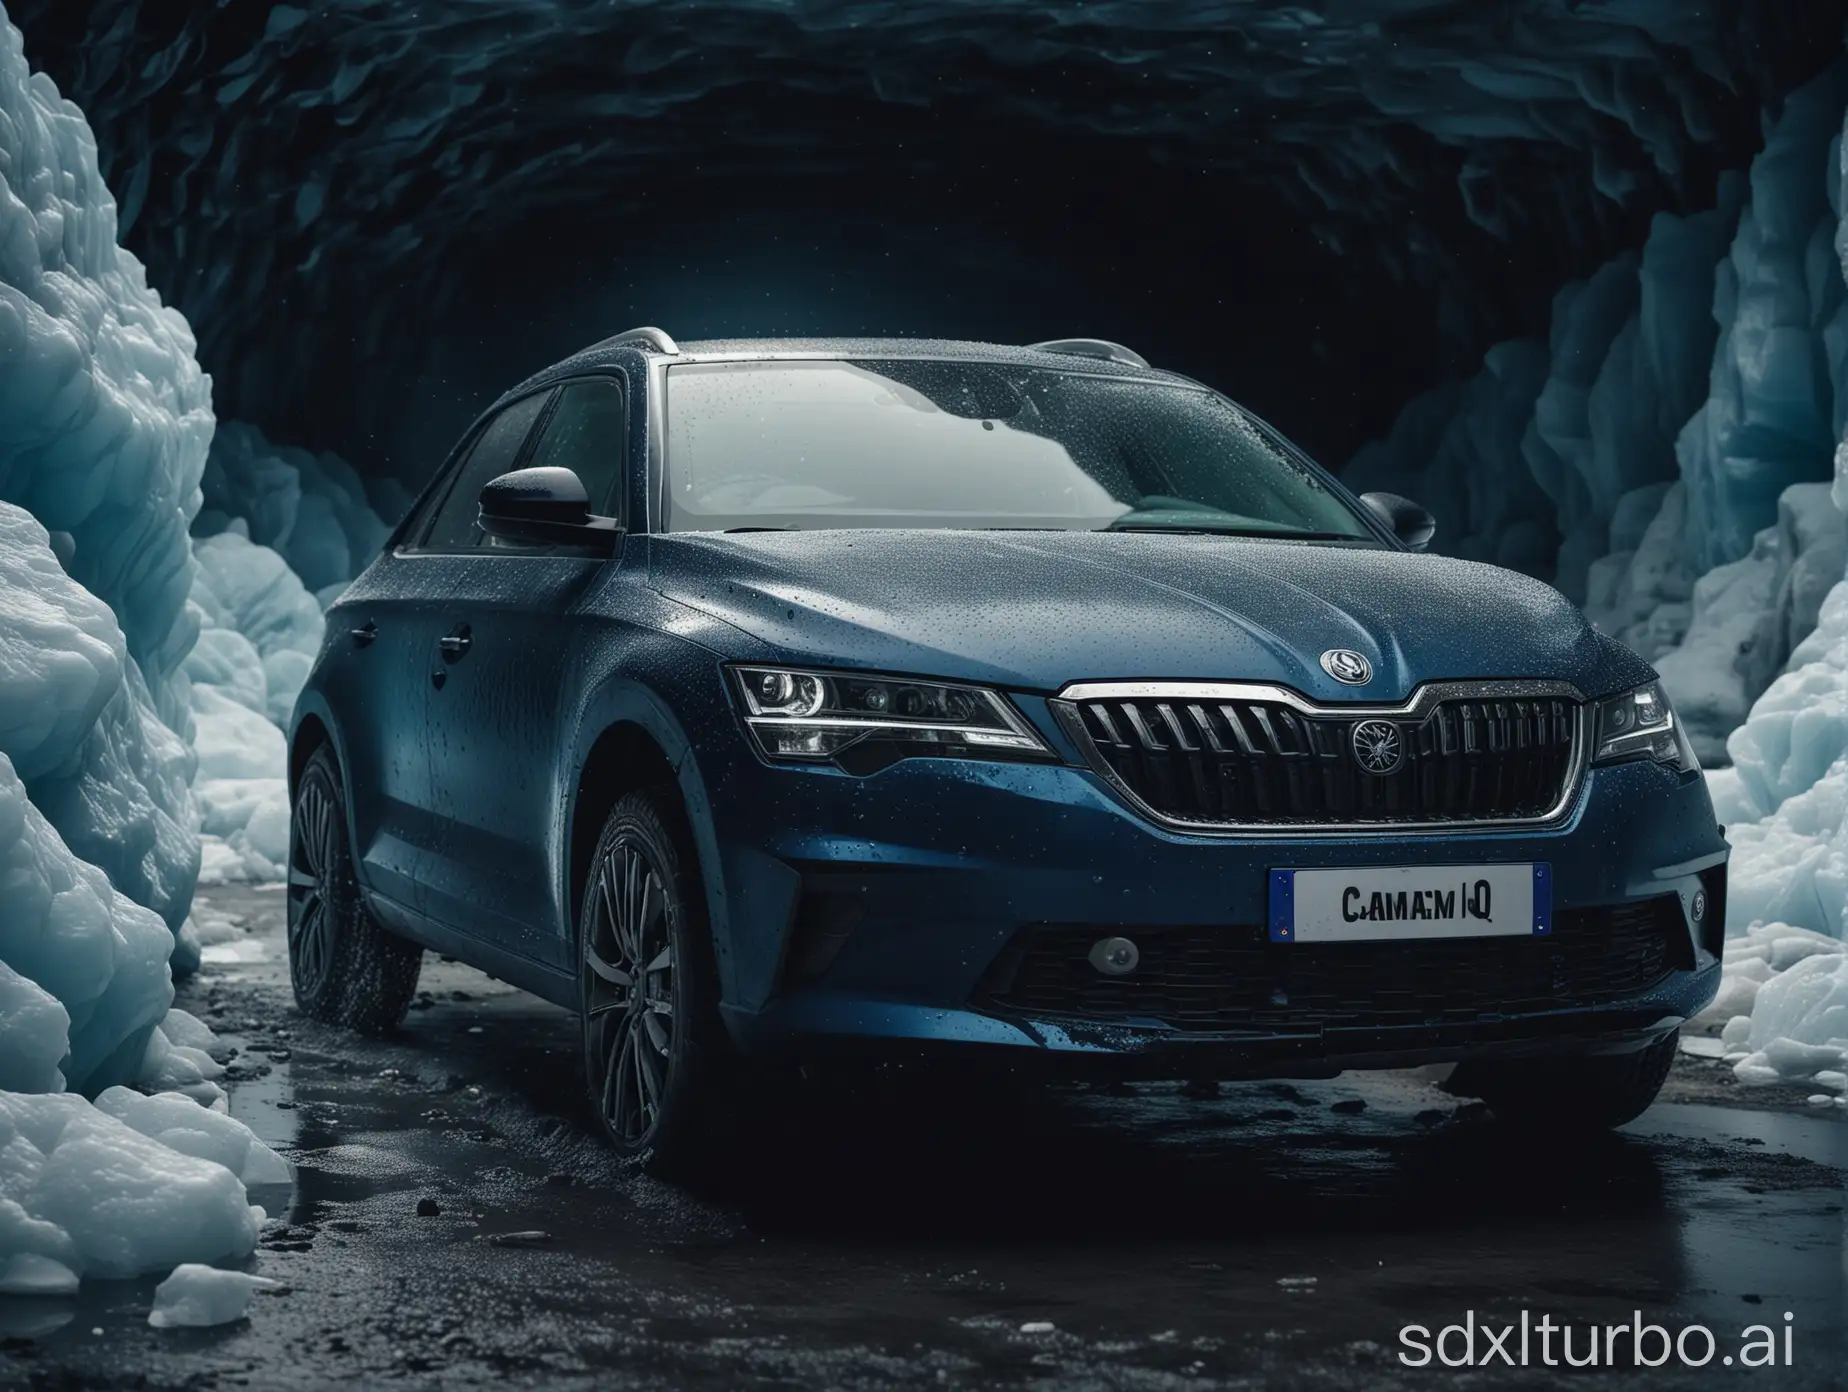 professional front portrait photo of Skoda Camiq car driving in dark blue glacial ice cave. Matte navy blue paint. Offroad bumper. Bokeh. 